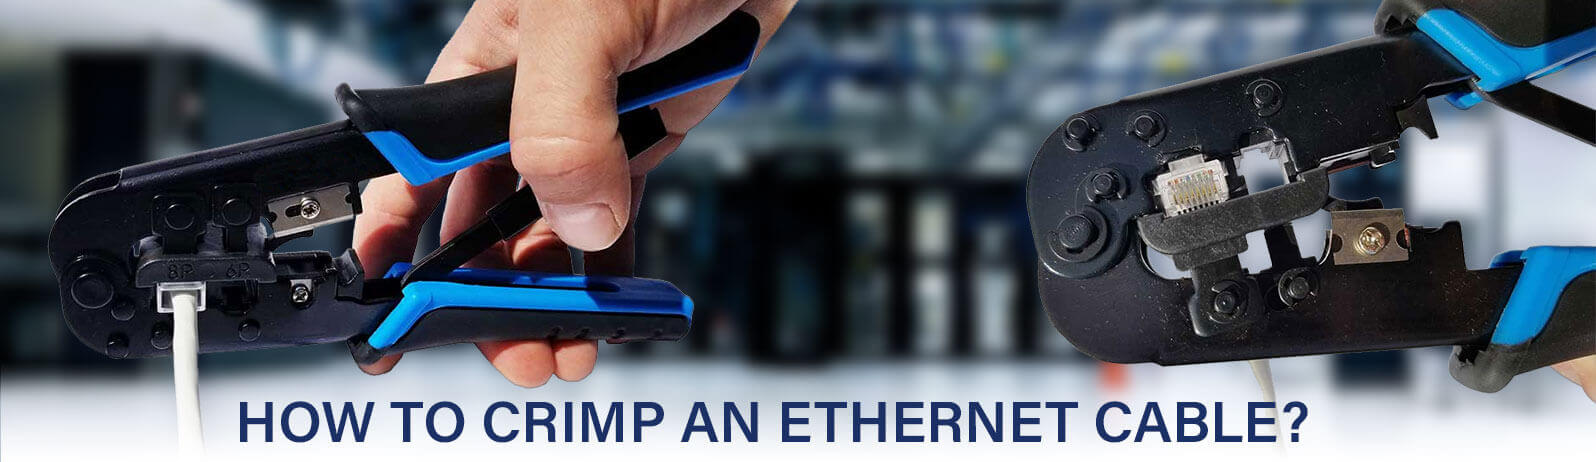 How to Crimp an Ethernet Cable